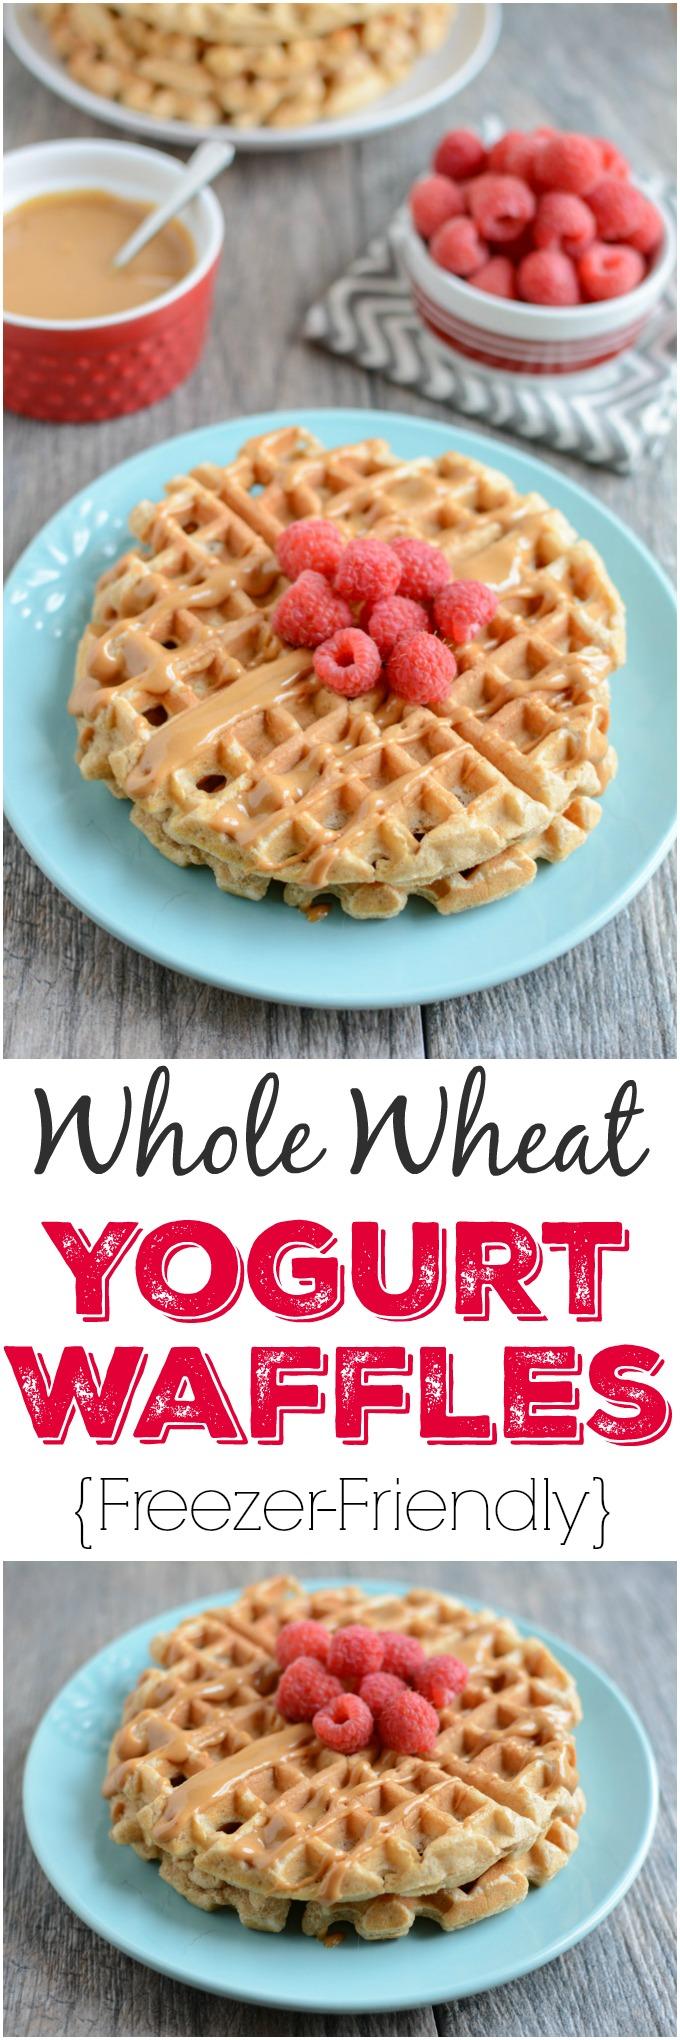 These Whole Wheat Yogurt Waffles are easy to make and packed with protein and fiber. Make a batch ahead of time to stock your freezer and reheat them for a quick breakfast or snack. 